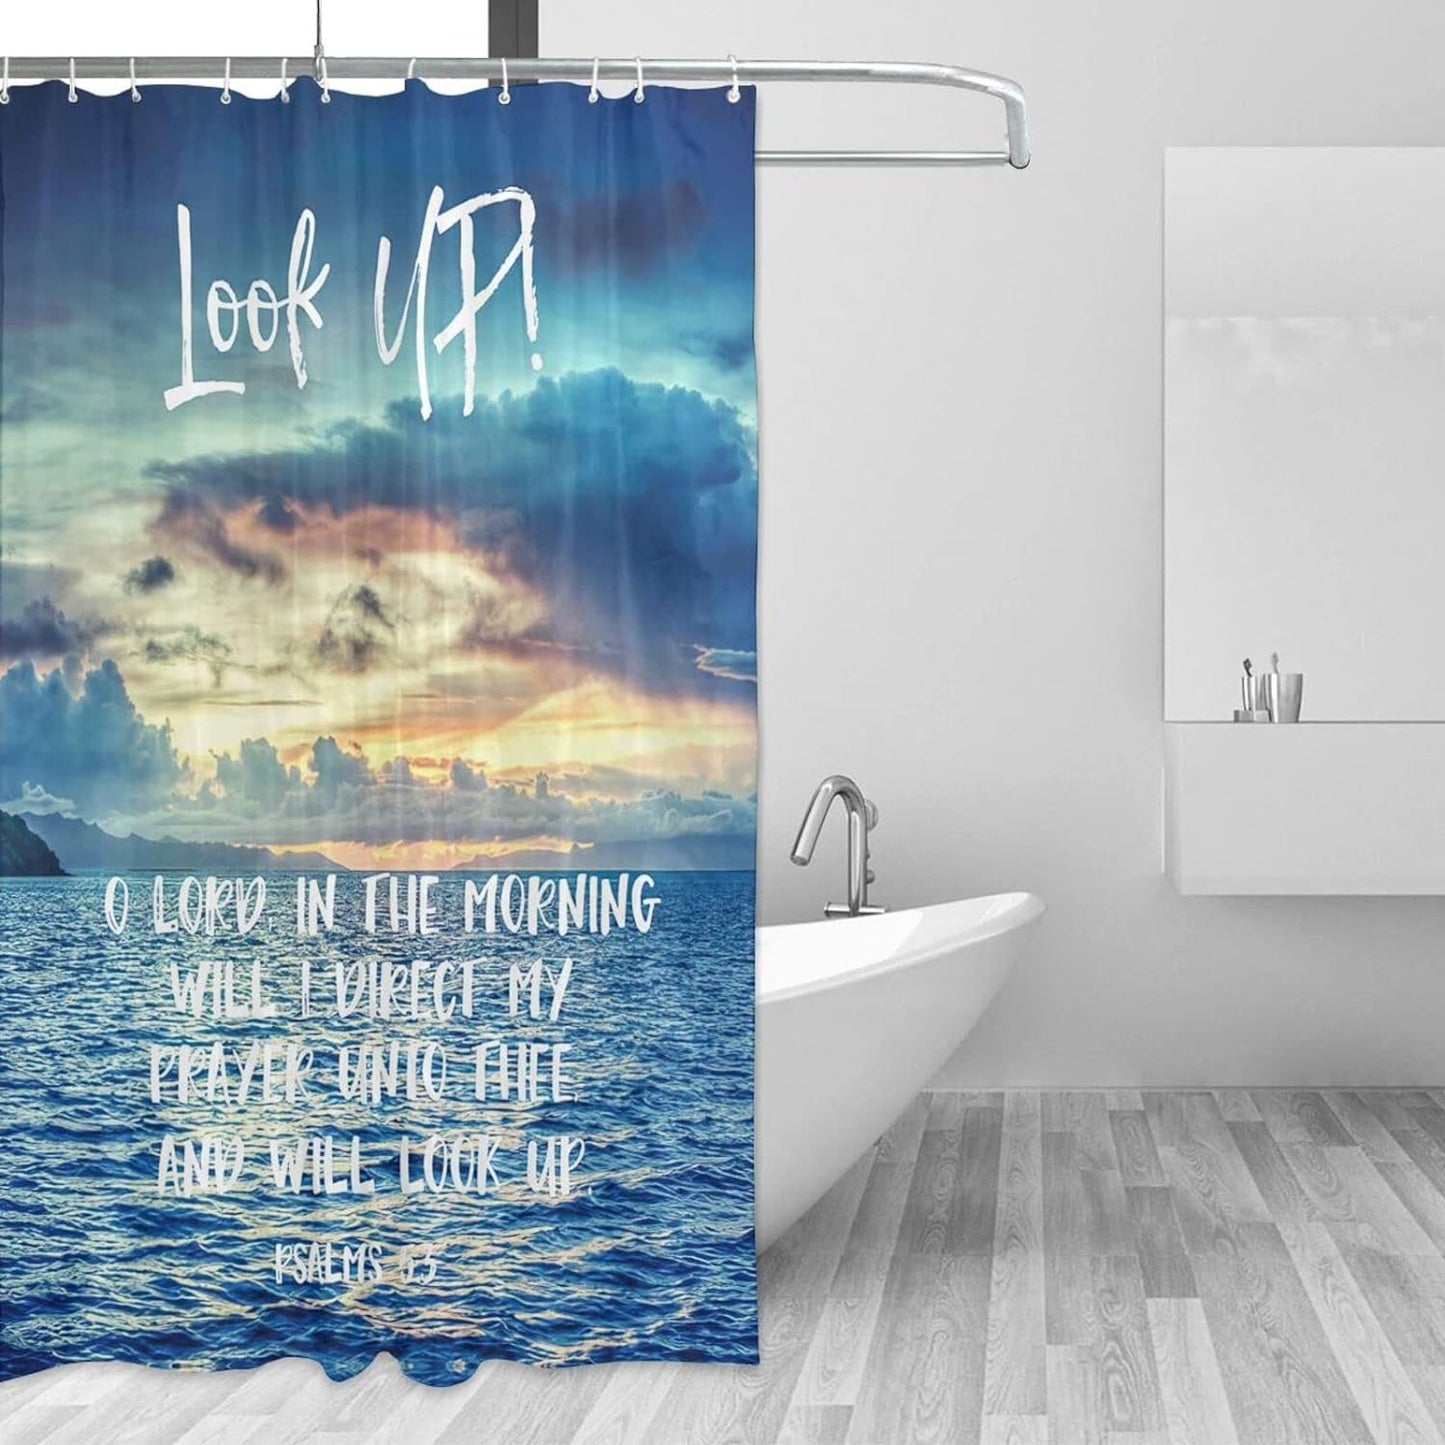 Bible Verse Quotes Shower Curtain Christian Scripture Quotes Bathroom Shower Curtains Sea Ocean Shower Curtain Polyester Fabric Waterproof 12 Pack Plastic Hooks 60x72inch claimedbygoddesigns